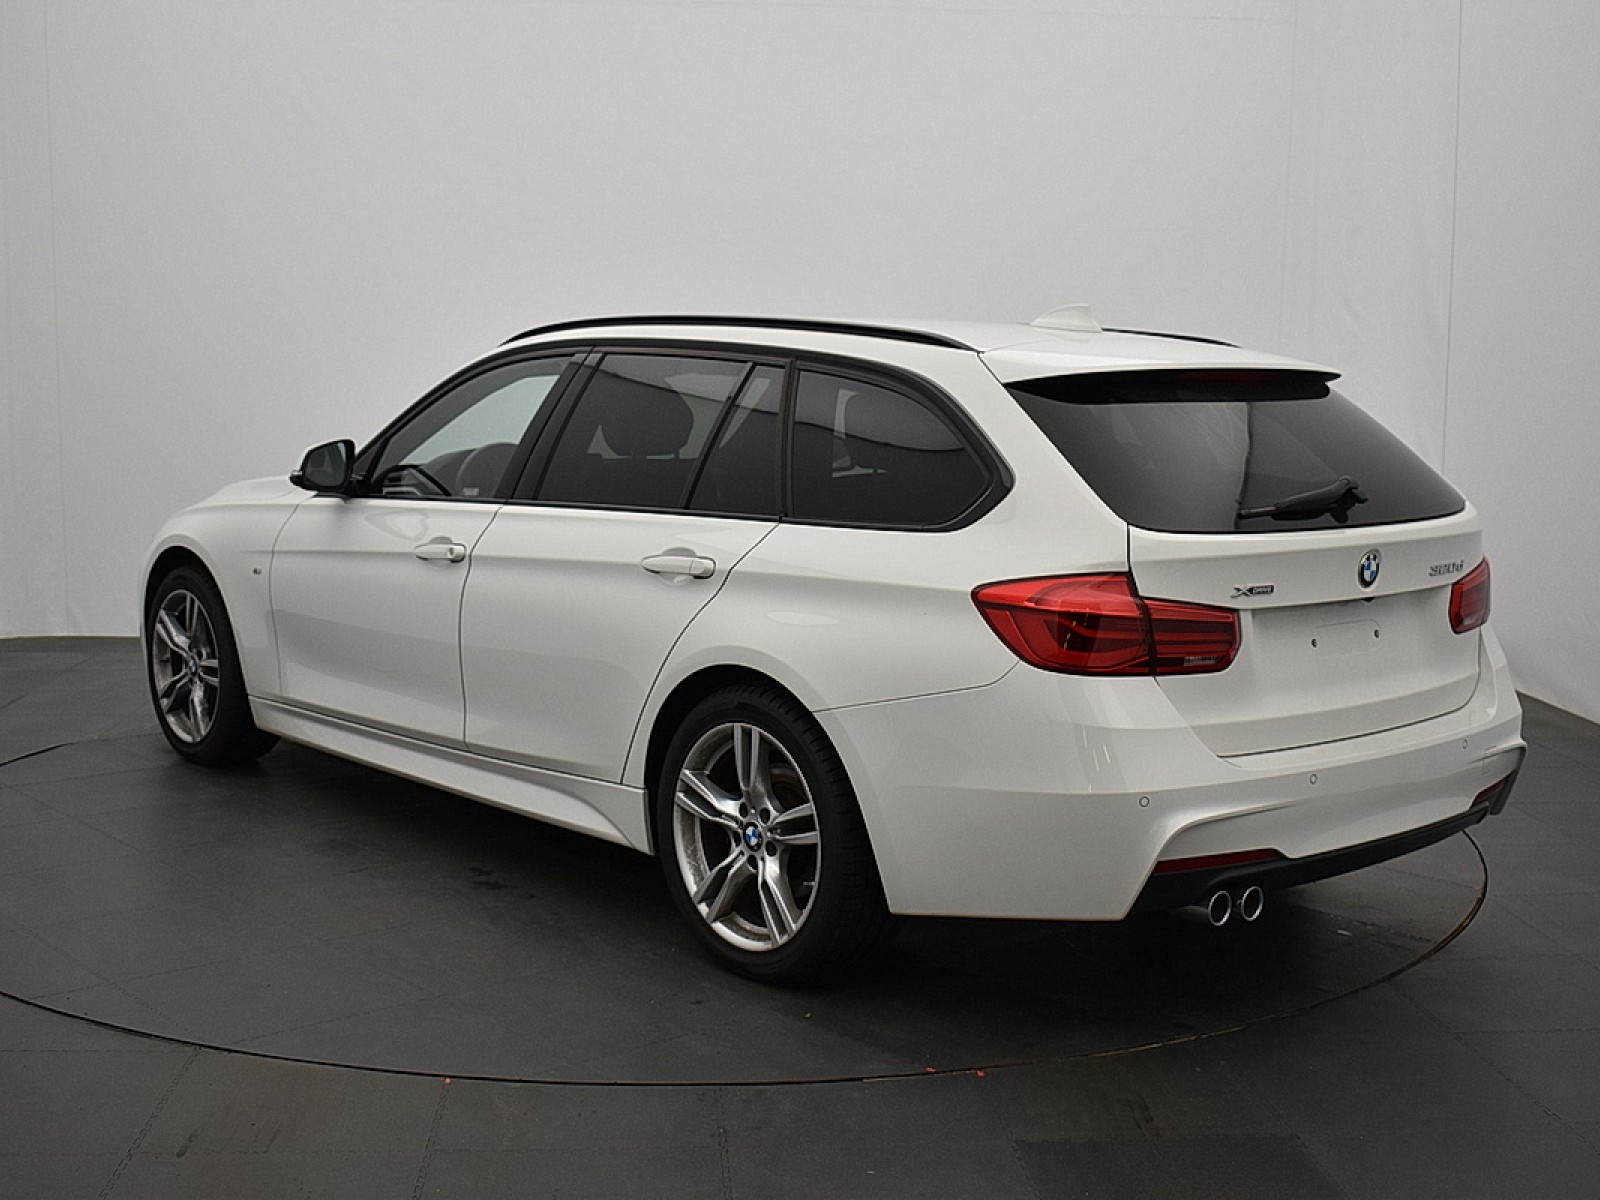 BMW - SERIE 3 TOURING F31 - #180977 - 2